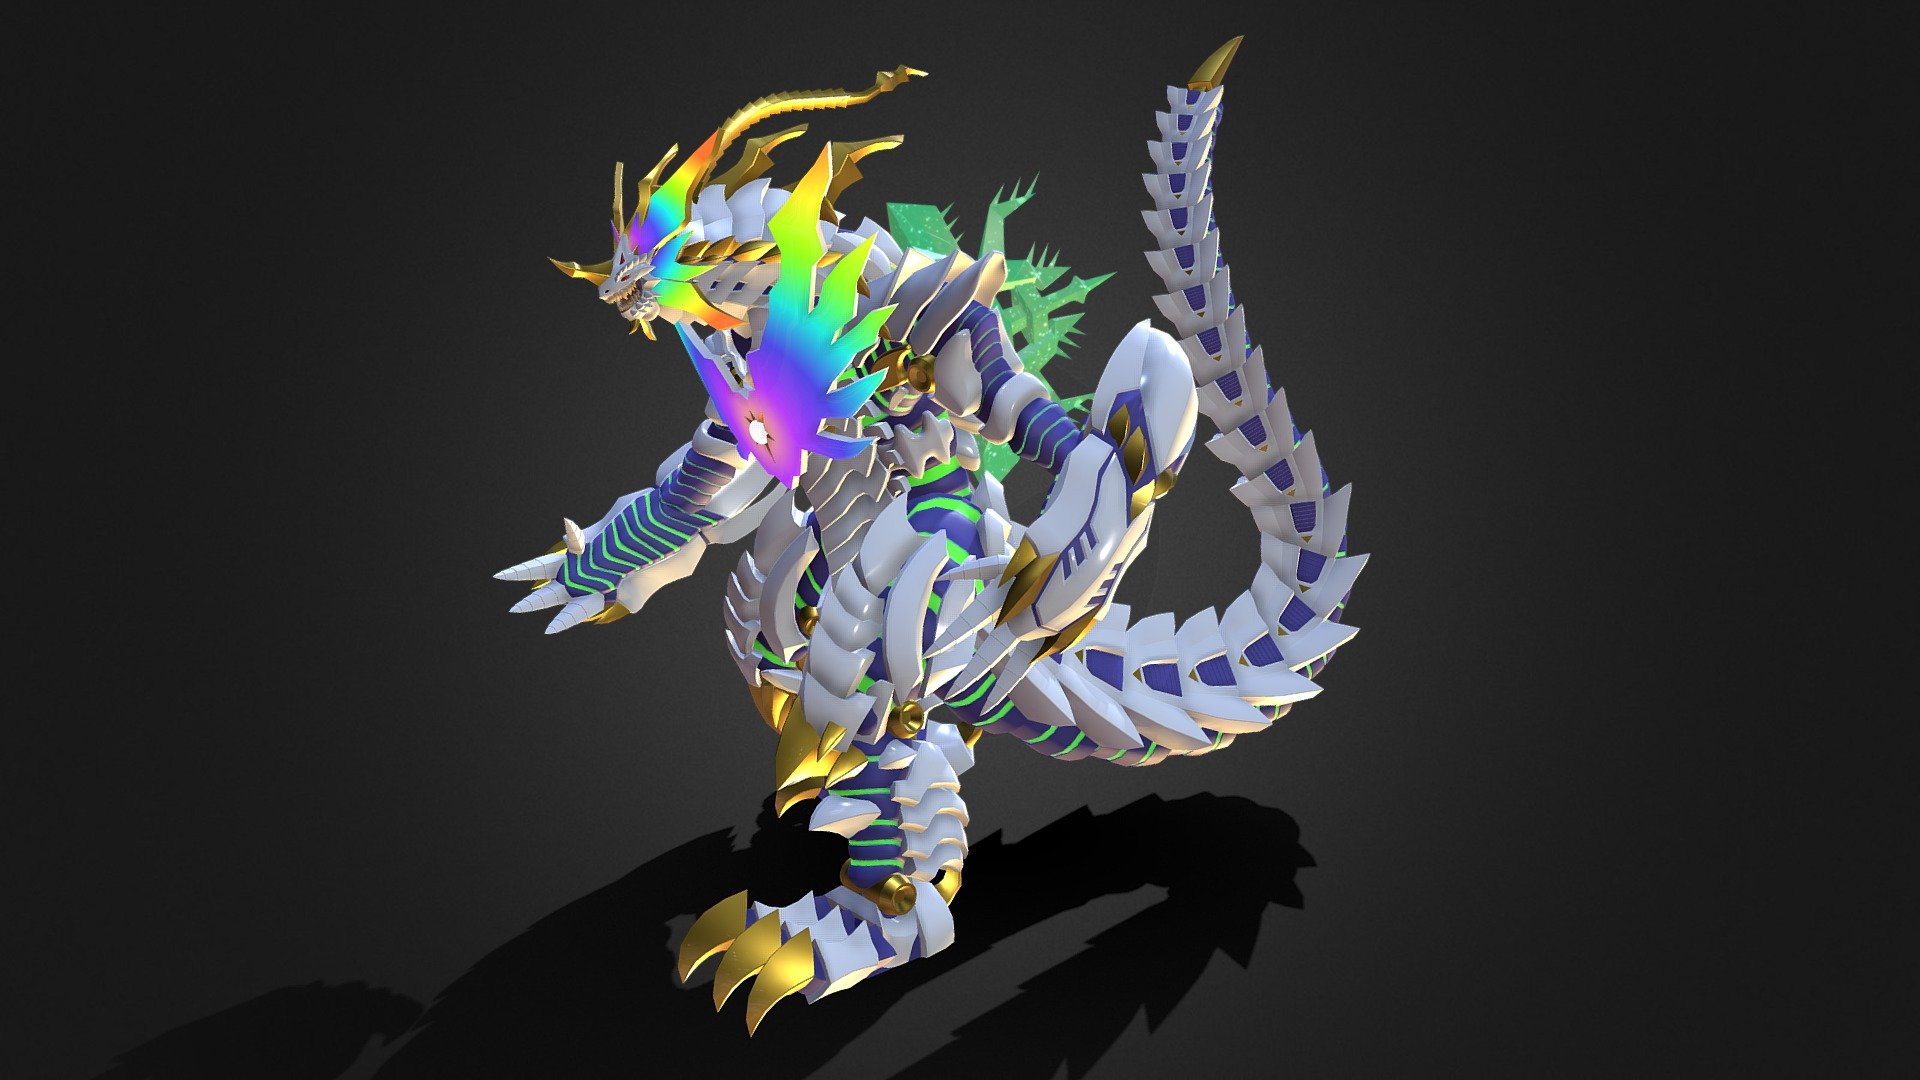 If you're interested in purchasing any of my models, contact me @ andrewdisaacs@yahoo.com

The final Kaiju from Gridman SSSS.DYNAZENON.

Made by myself in 3DS Max 3d model